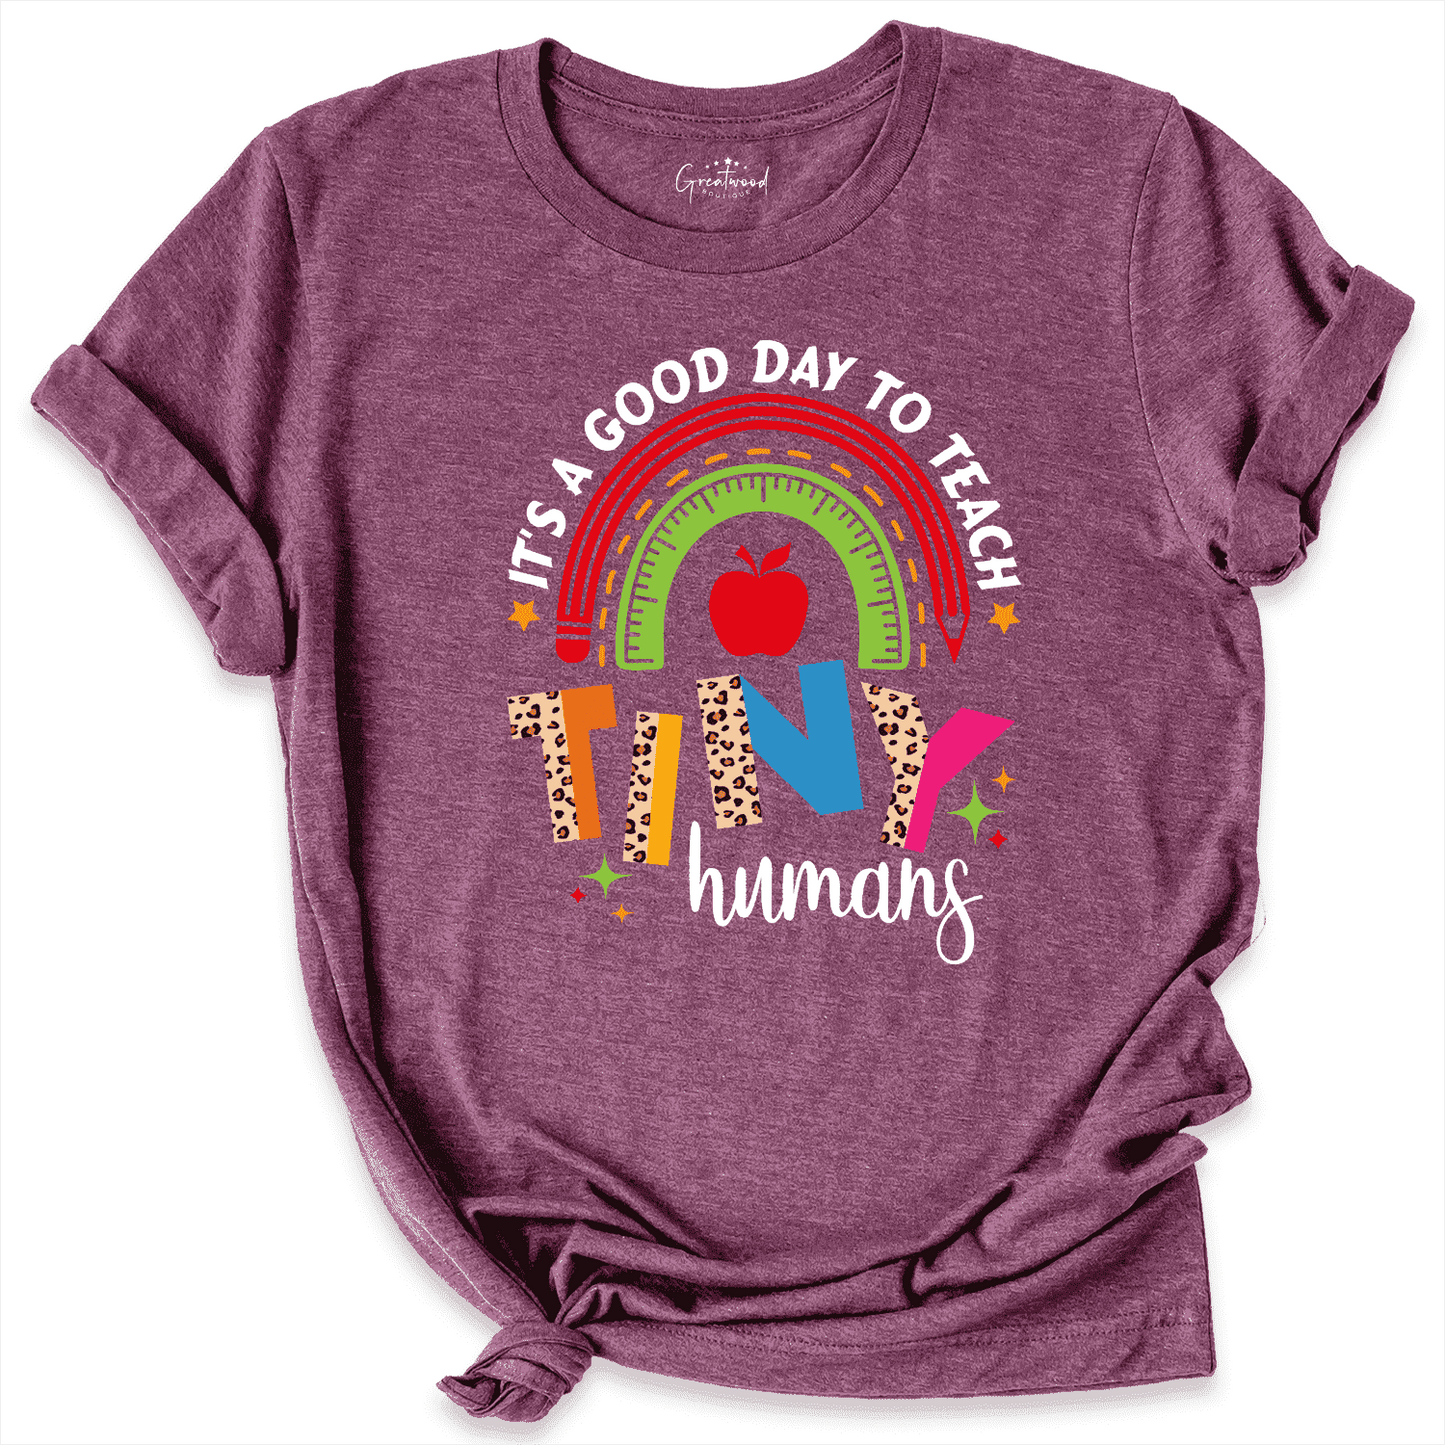 It's A Good Day To Teach Tiny Humans Shirt Maroon - Greatwood Boutique